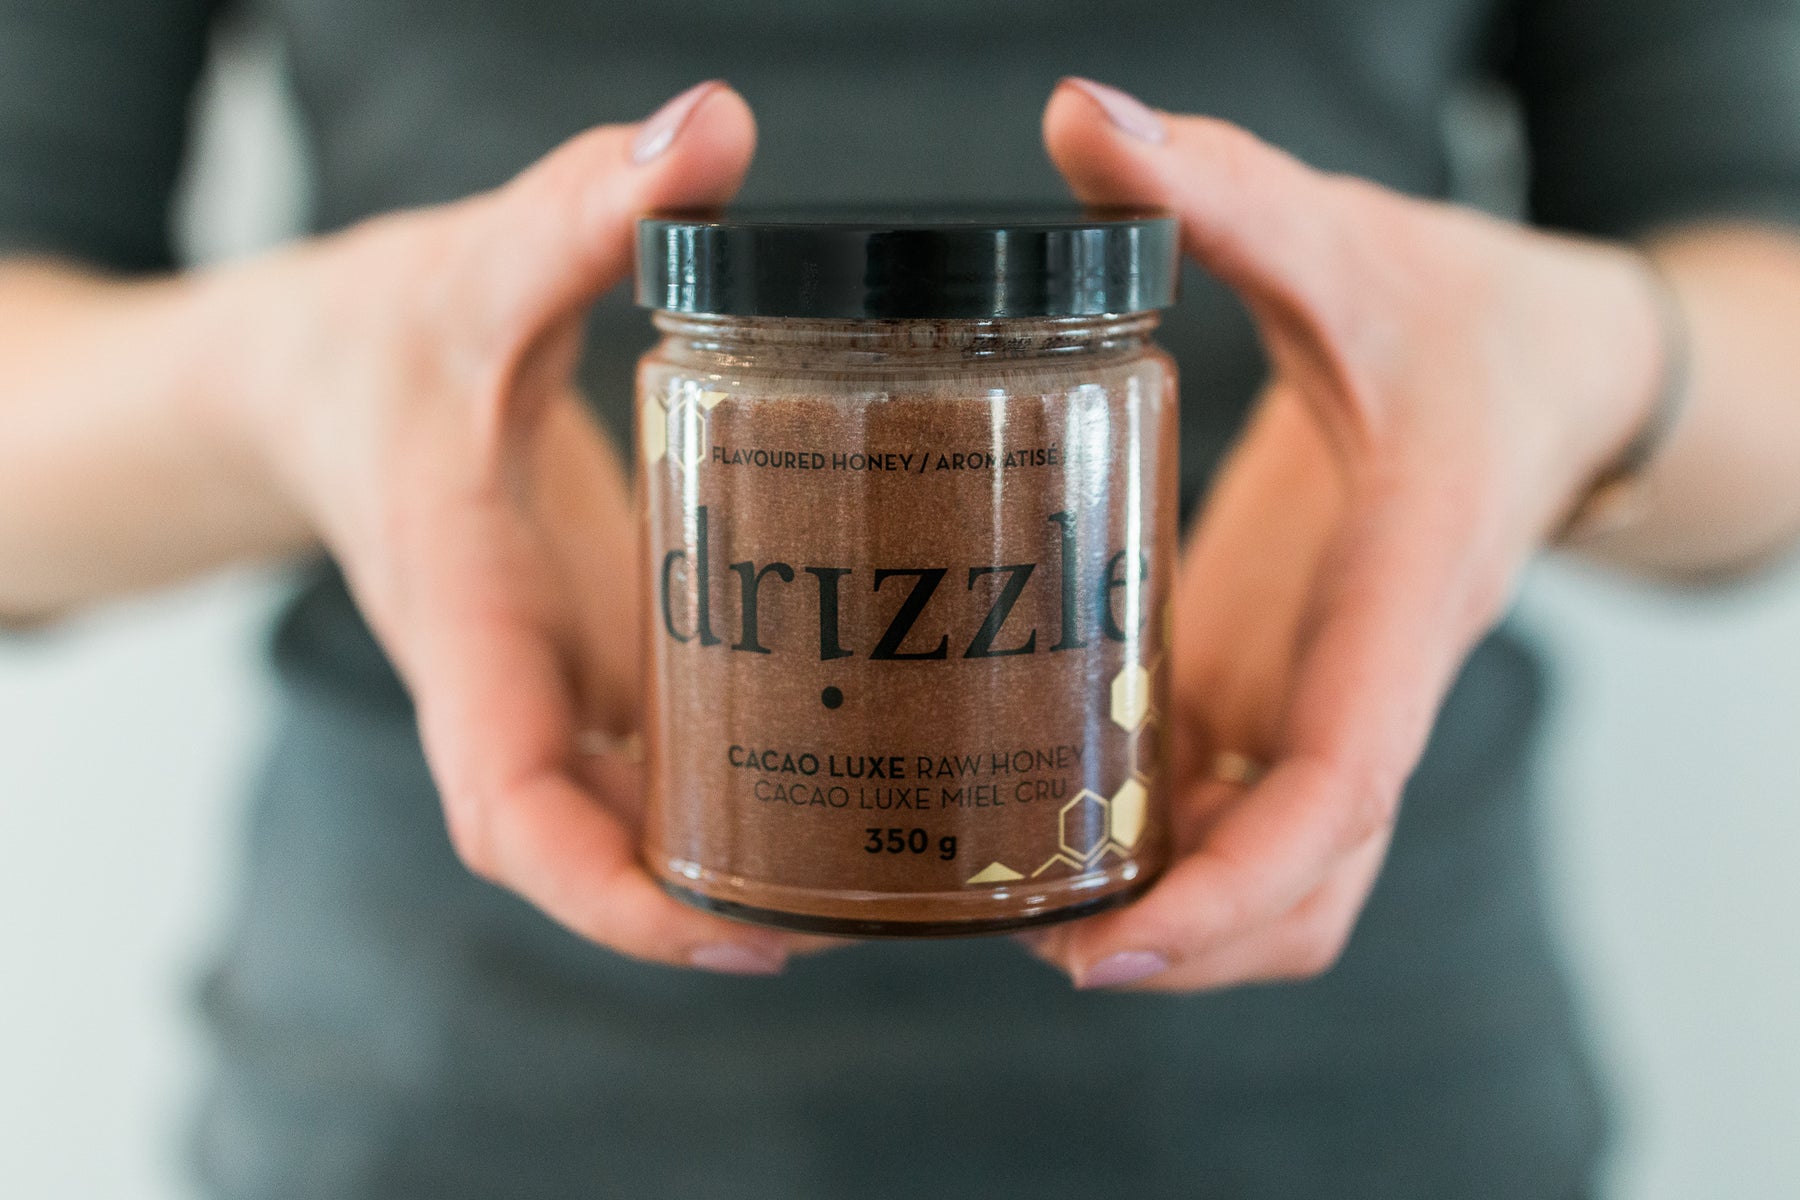 Photo of Drizzle Cacao Luxe Honey being held by a woman.